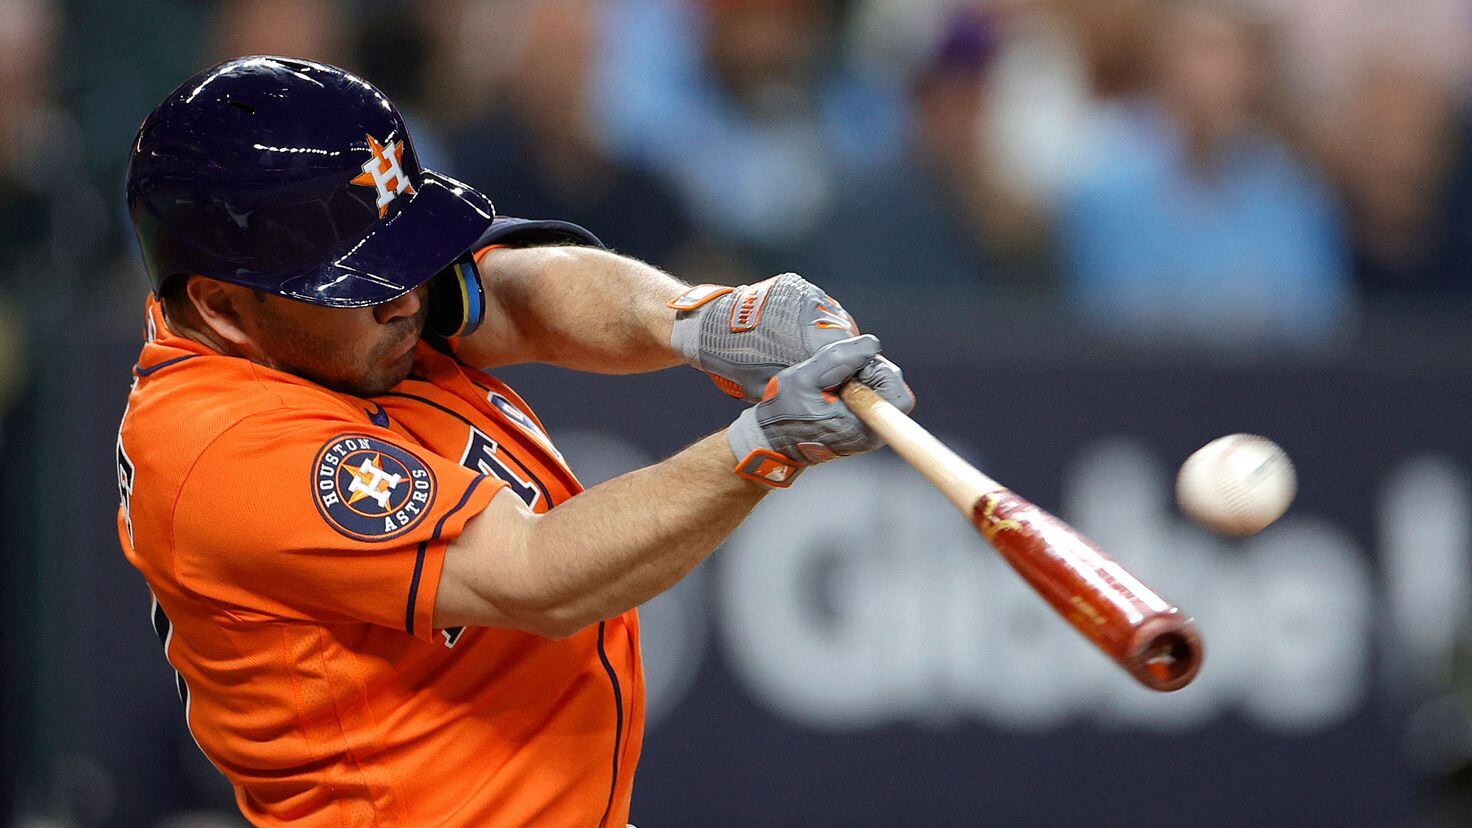 Astros: Inconsistent closers since Pujols home run